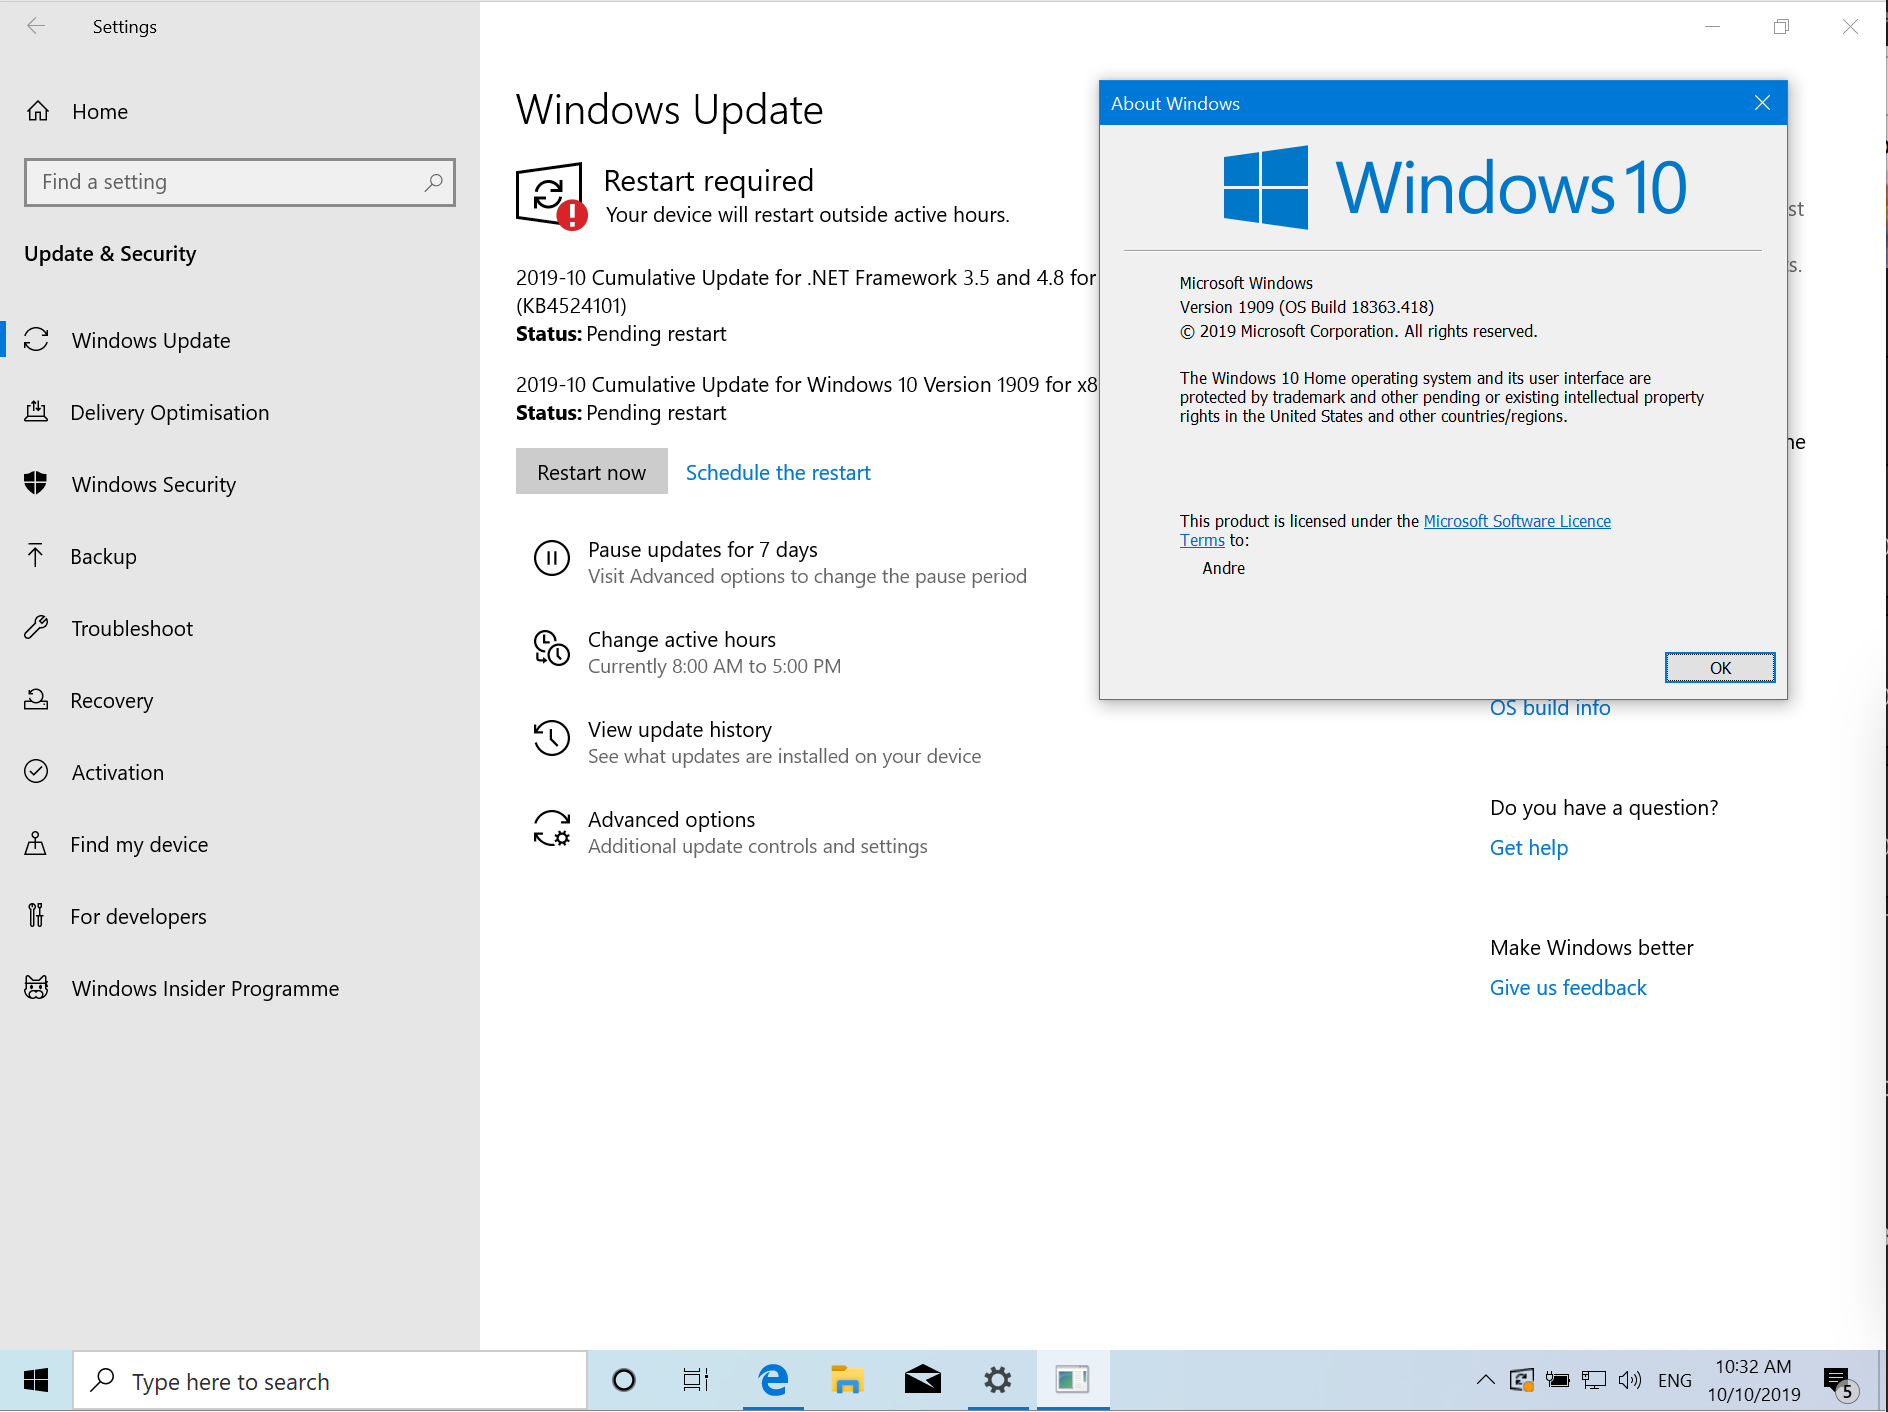 How to Install the Latest Windows 10 Feature Update Using Windows Update 727a5186-9ad6-48ce-8685-656b1e63ef54?upload=true.png